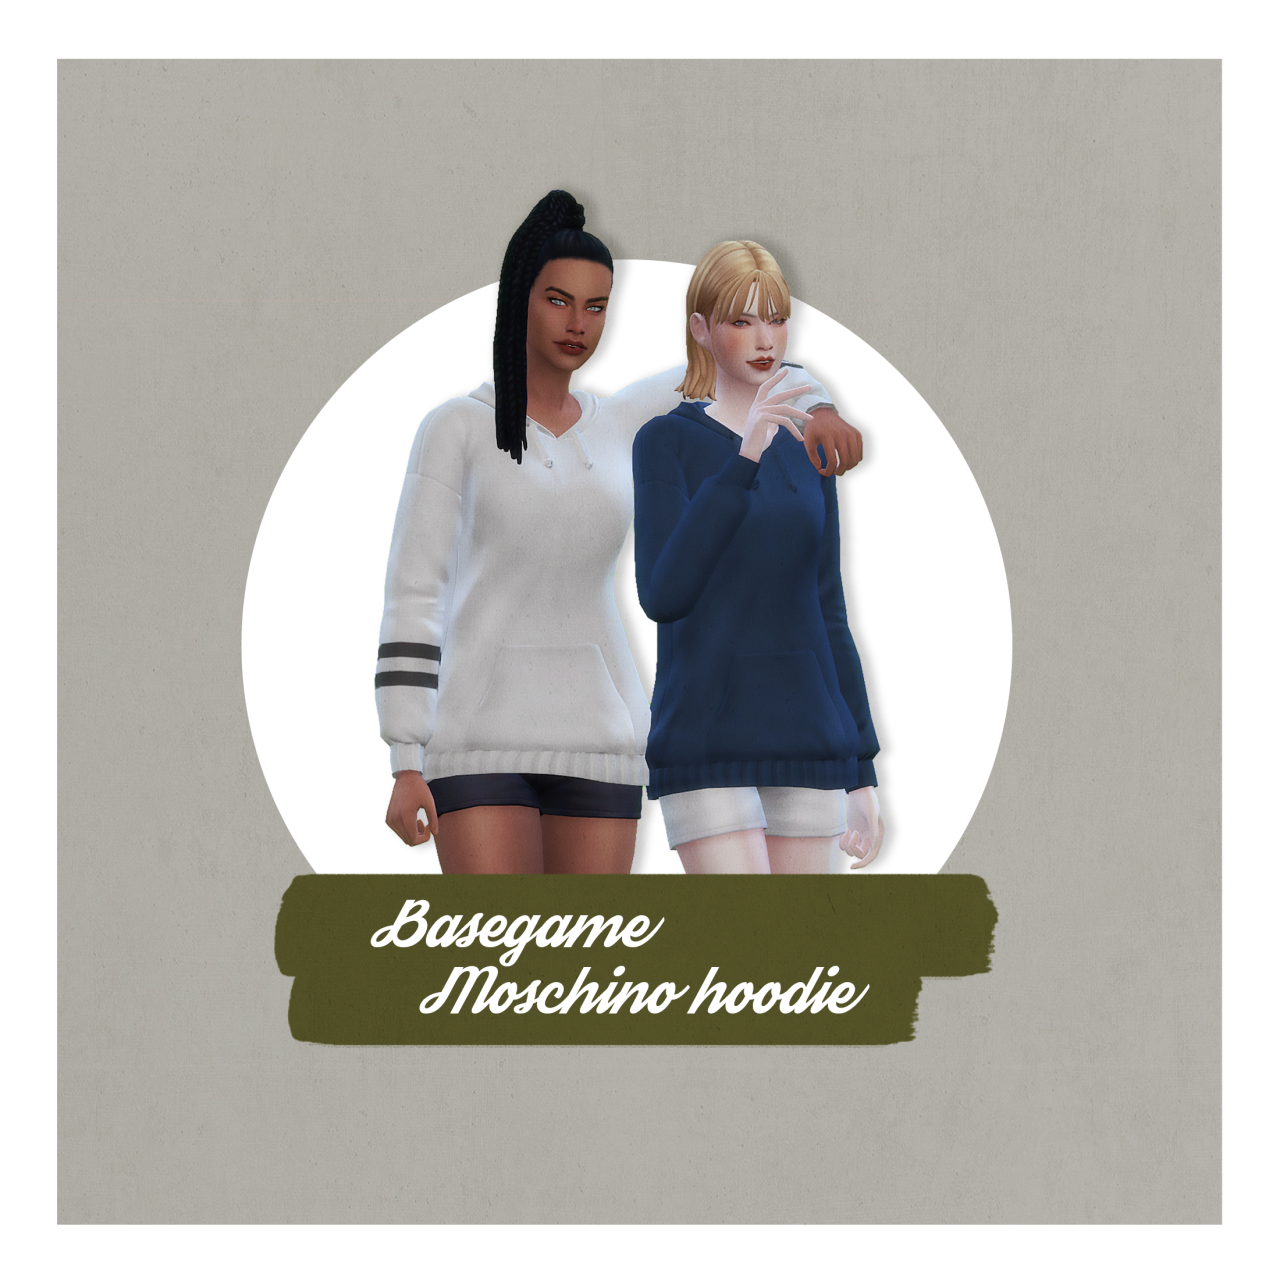 ● Moschino hoodie retexture  / Moschino連帽衫材質重製18 swatches  / 18 個配色把原本的兔子圖案拿掉，改成比較基本的顏色。

I removed the rabbit pattern and changed it to a more basic style.Download  [DROPBOX] #TS4#ts4 cc#ts4 mods#ts4 download#模擬市民4#ryn download